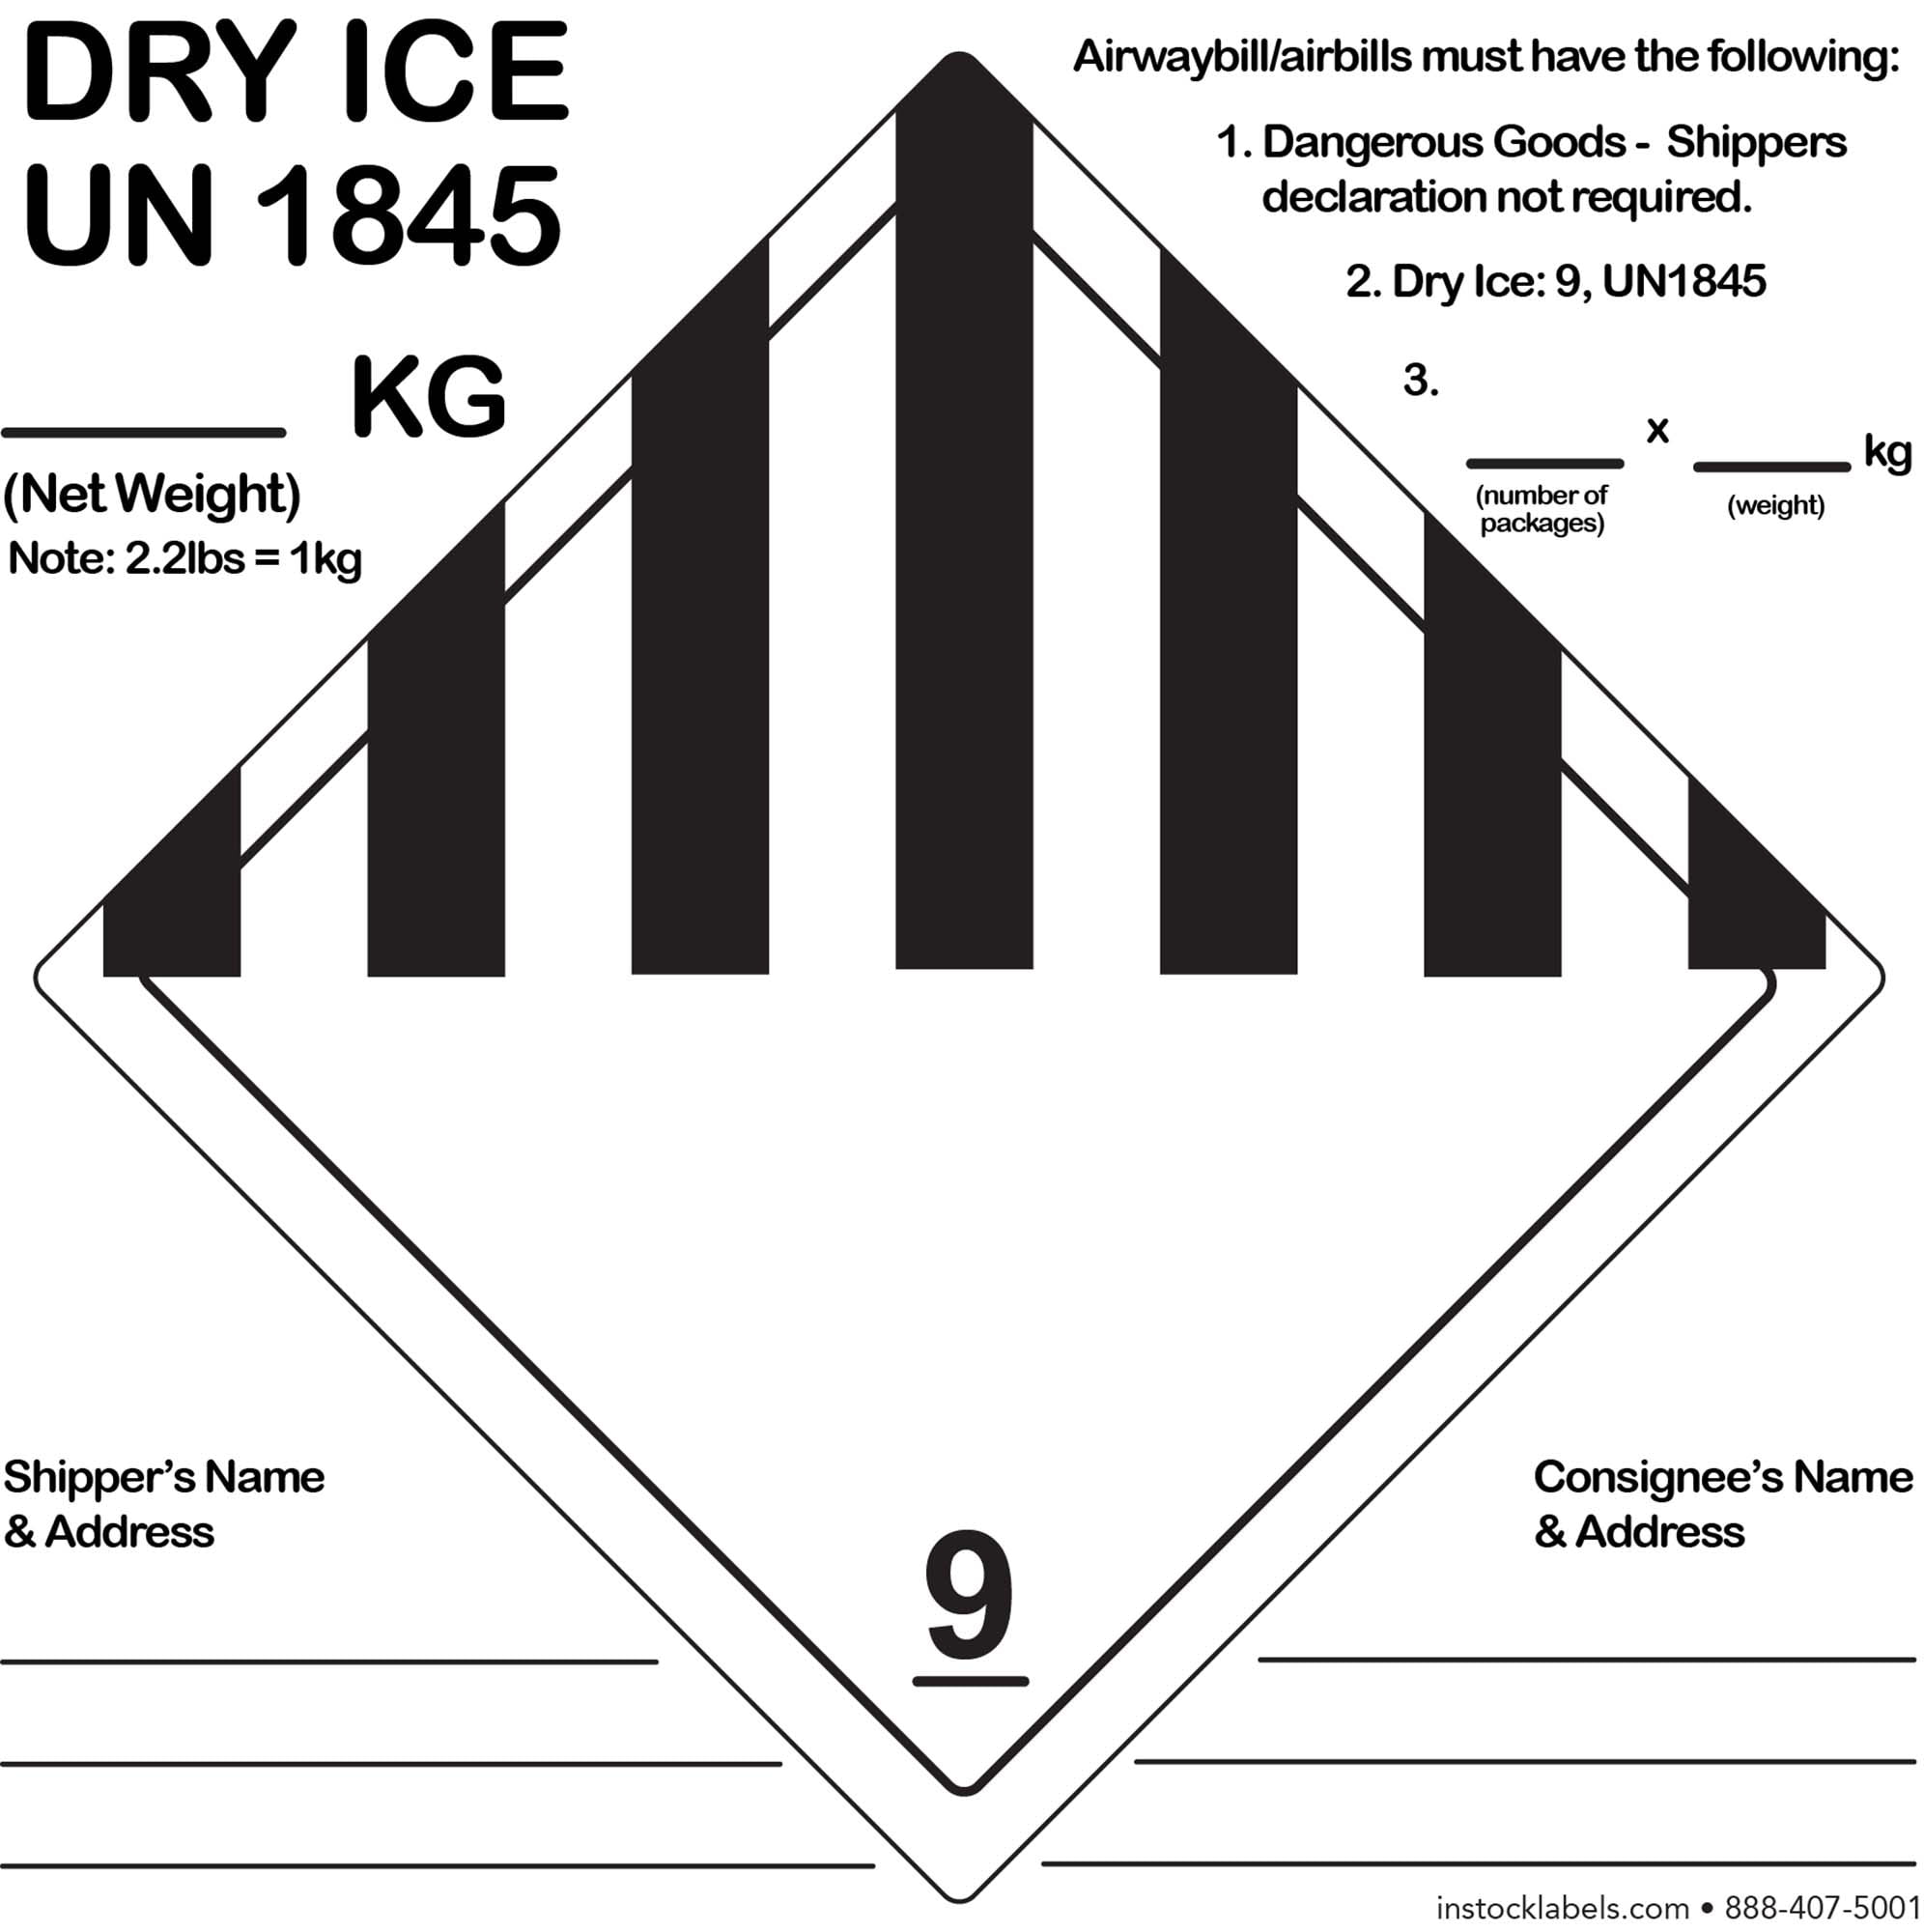 dry-ice-un1845-dot-hazmat-class-9-shipping-labels-6-square-500-pack-instocklabels